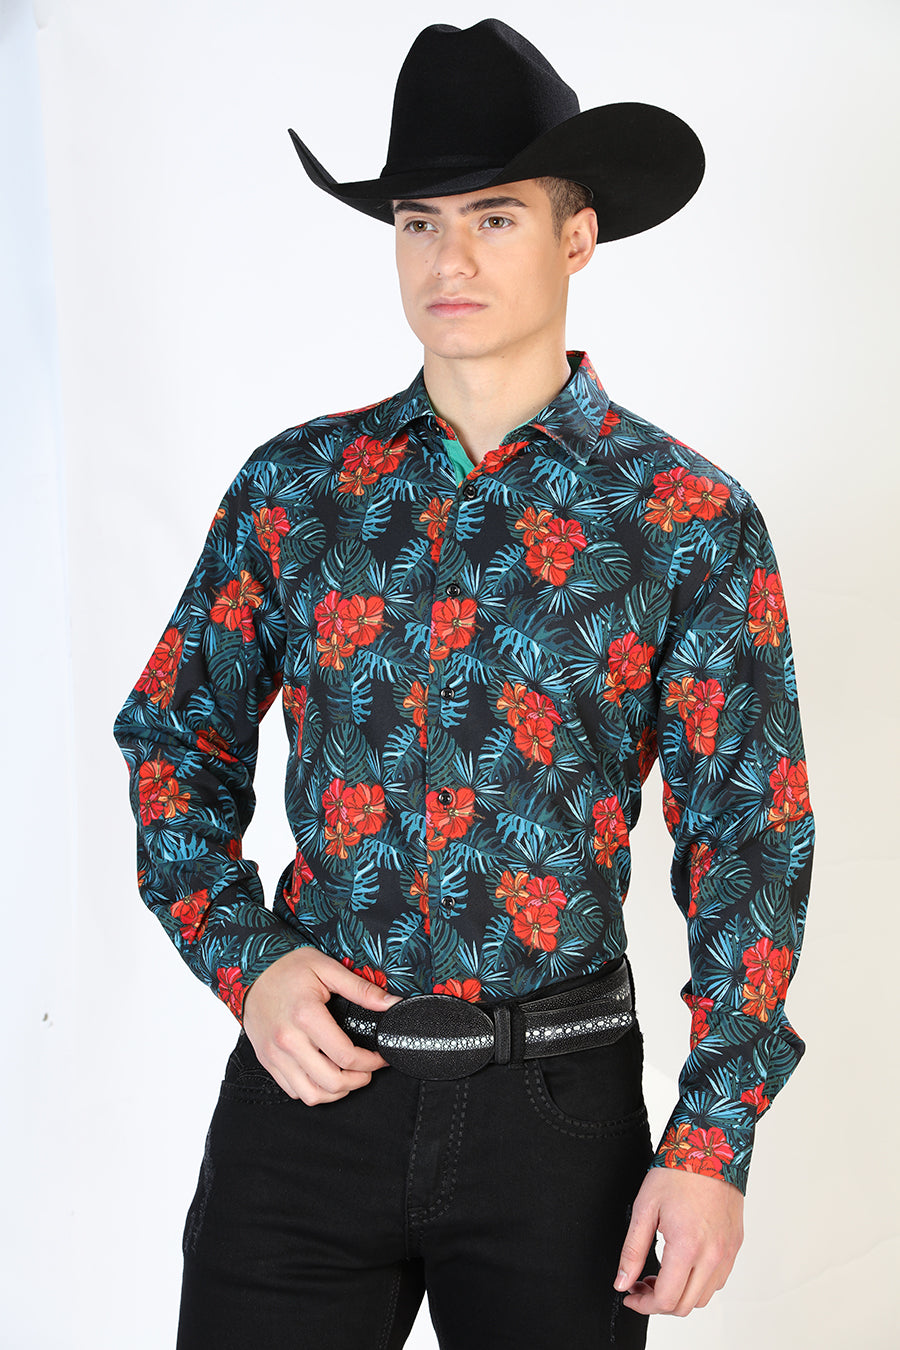 Black Floral Print Long Sleeve Denim Shirt for Men 'The Lord of the Skies' - ID: 126276